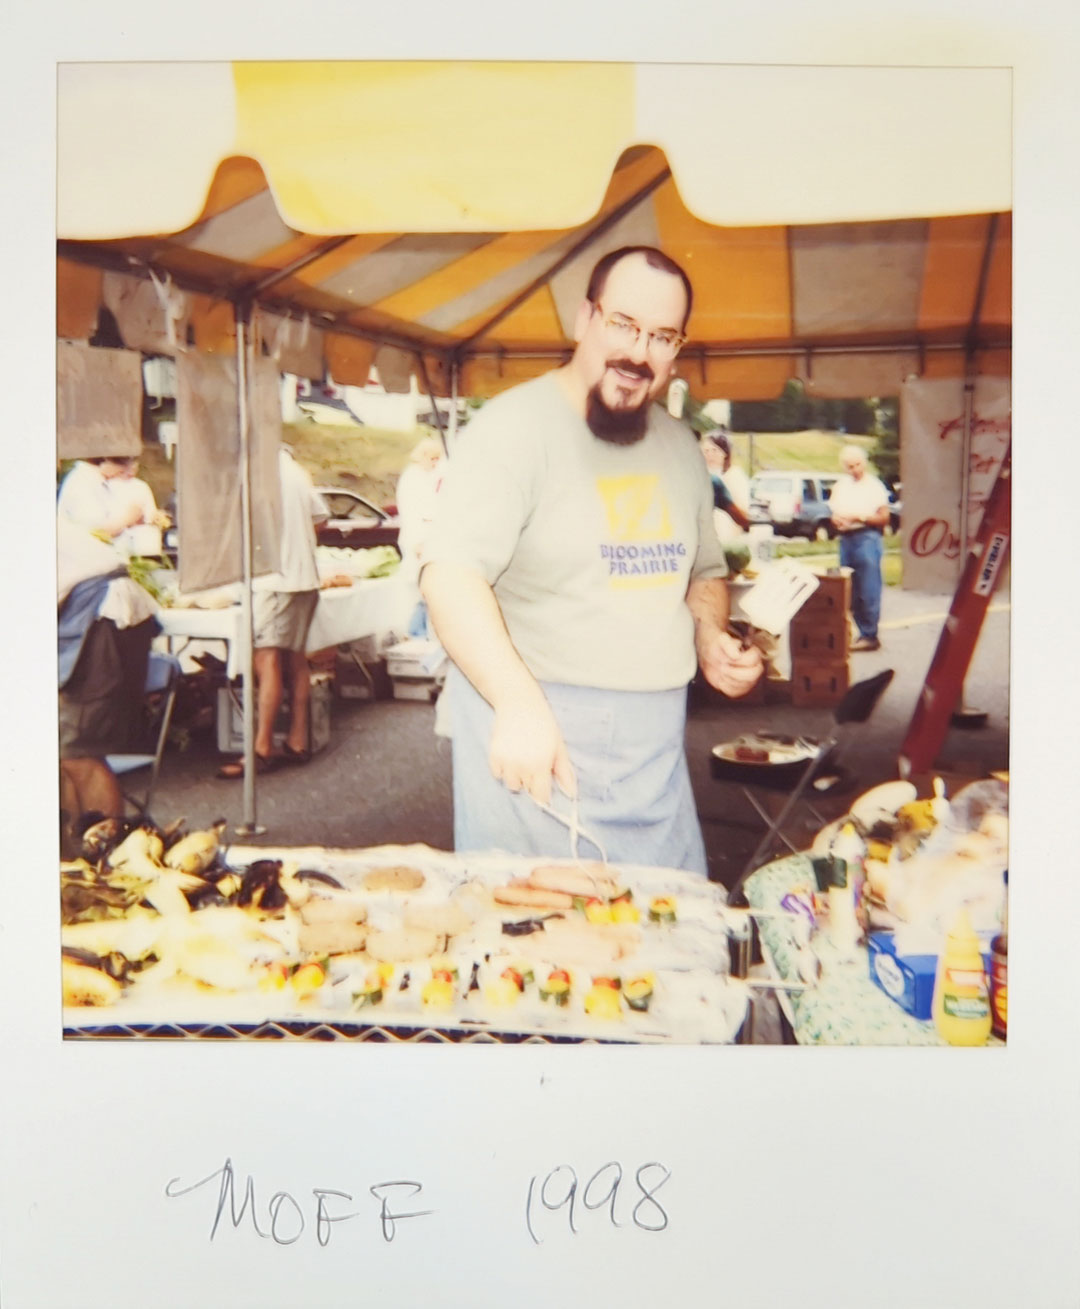 A person smiling while grilling food at an outdoor market stall. The person, wearing a t-shirt and apron, is holding a grilling fork, and various food items can be seen cooking on the grill. A yellow and white canopy covers the stall at Whole Foods Coop Duluth MN. Handwritten text below the image reads "MOFF 1998.